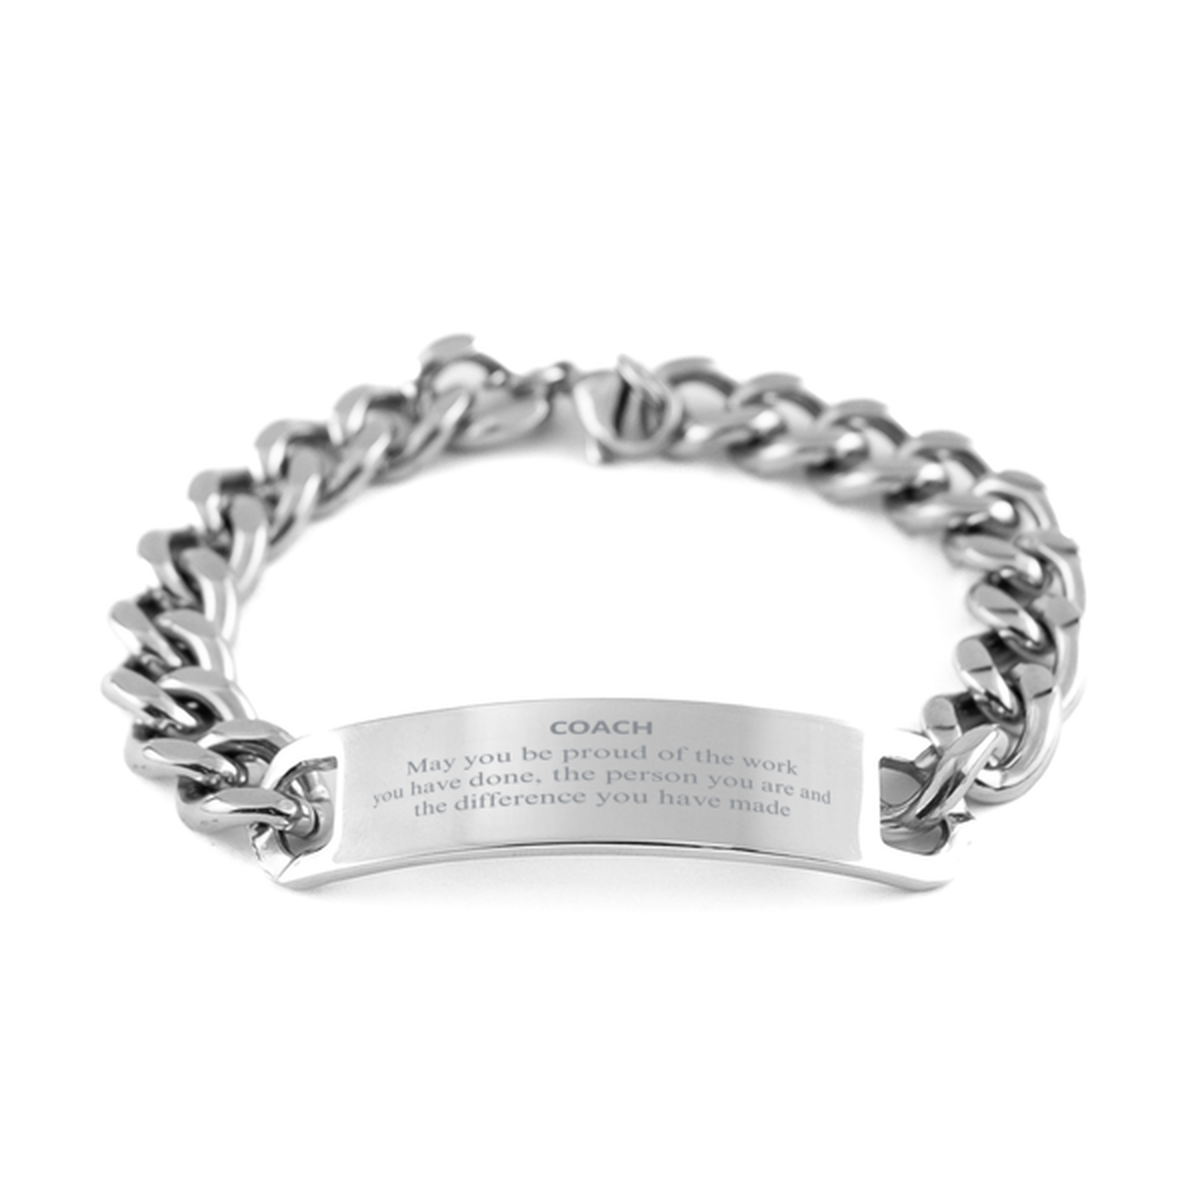 Coach May you be proud of the work you have done, Retirement Coach Cuban Chain Stainless Steel Bracelet for Colleague Appreciation Gifts Amazing for Coach